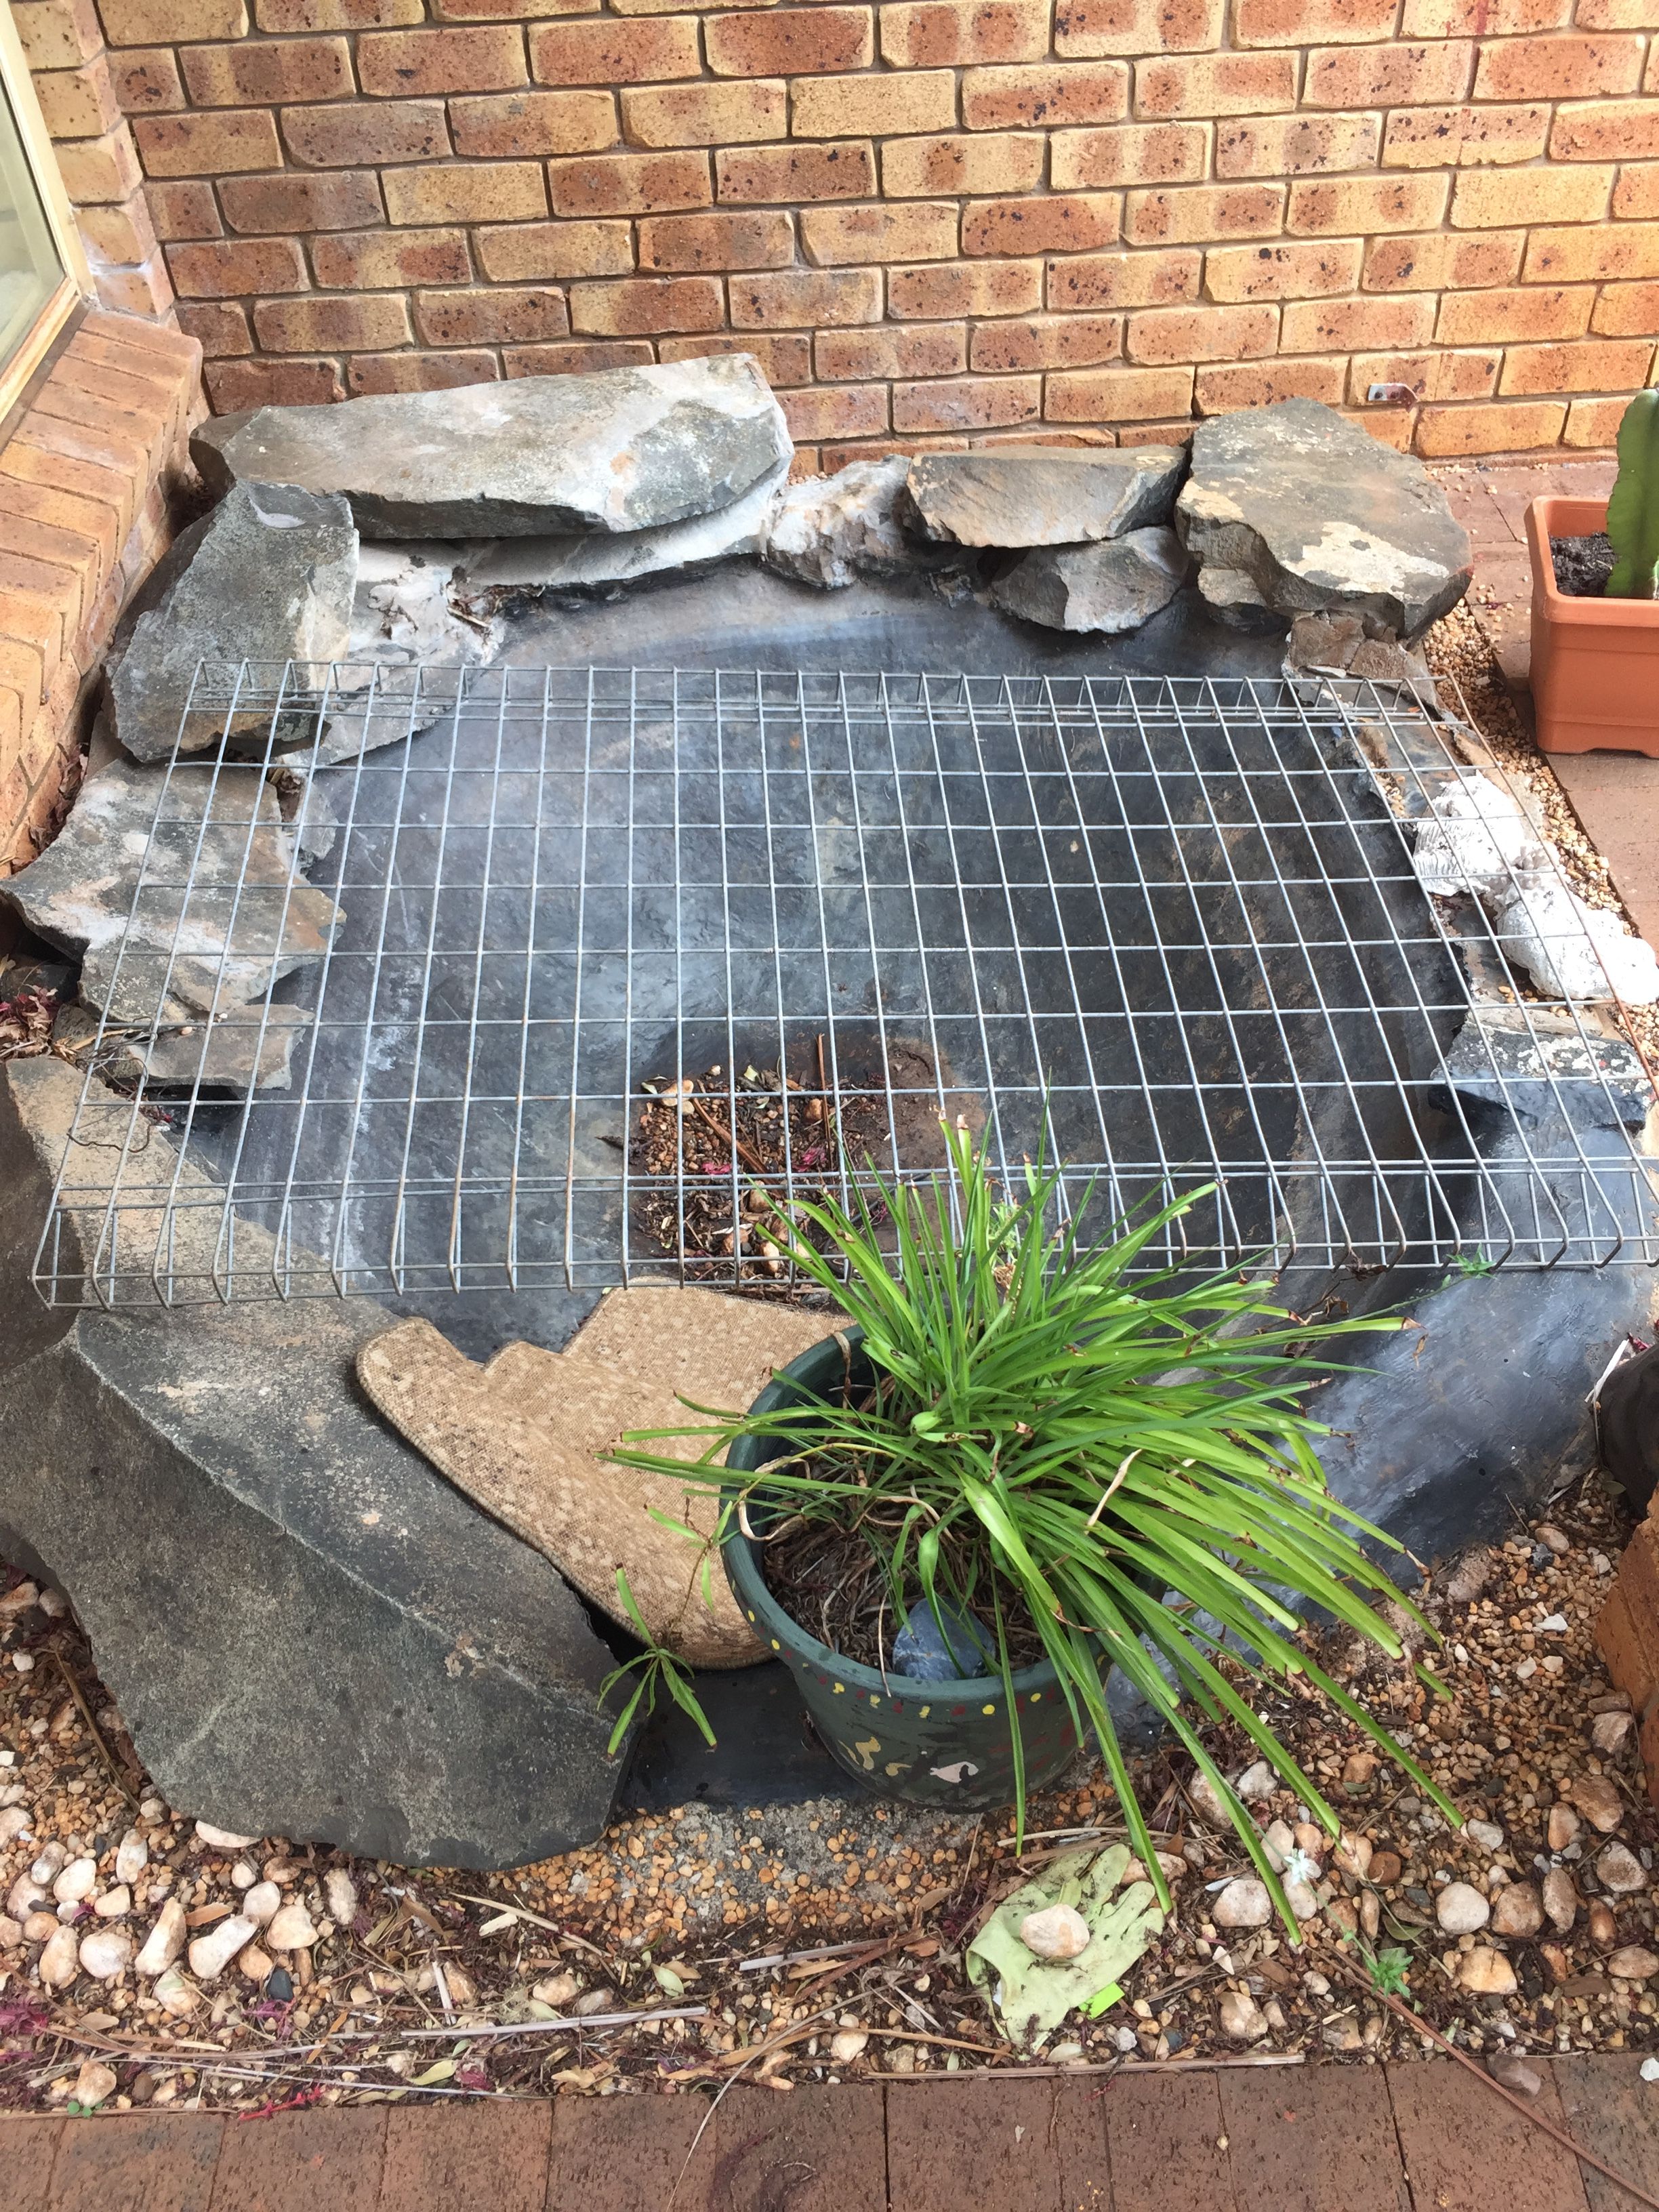 Filling in a concrete pond ideas | Bunnings Workshop community